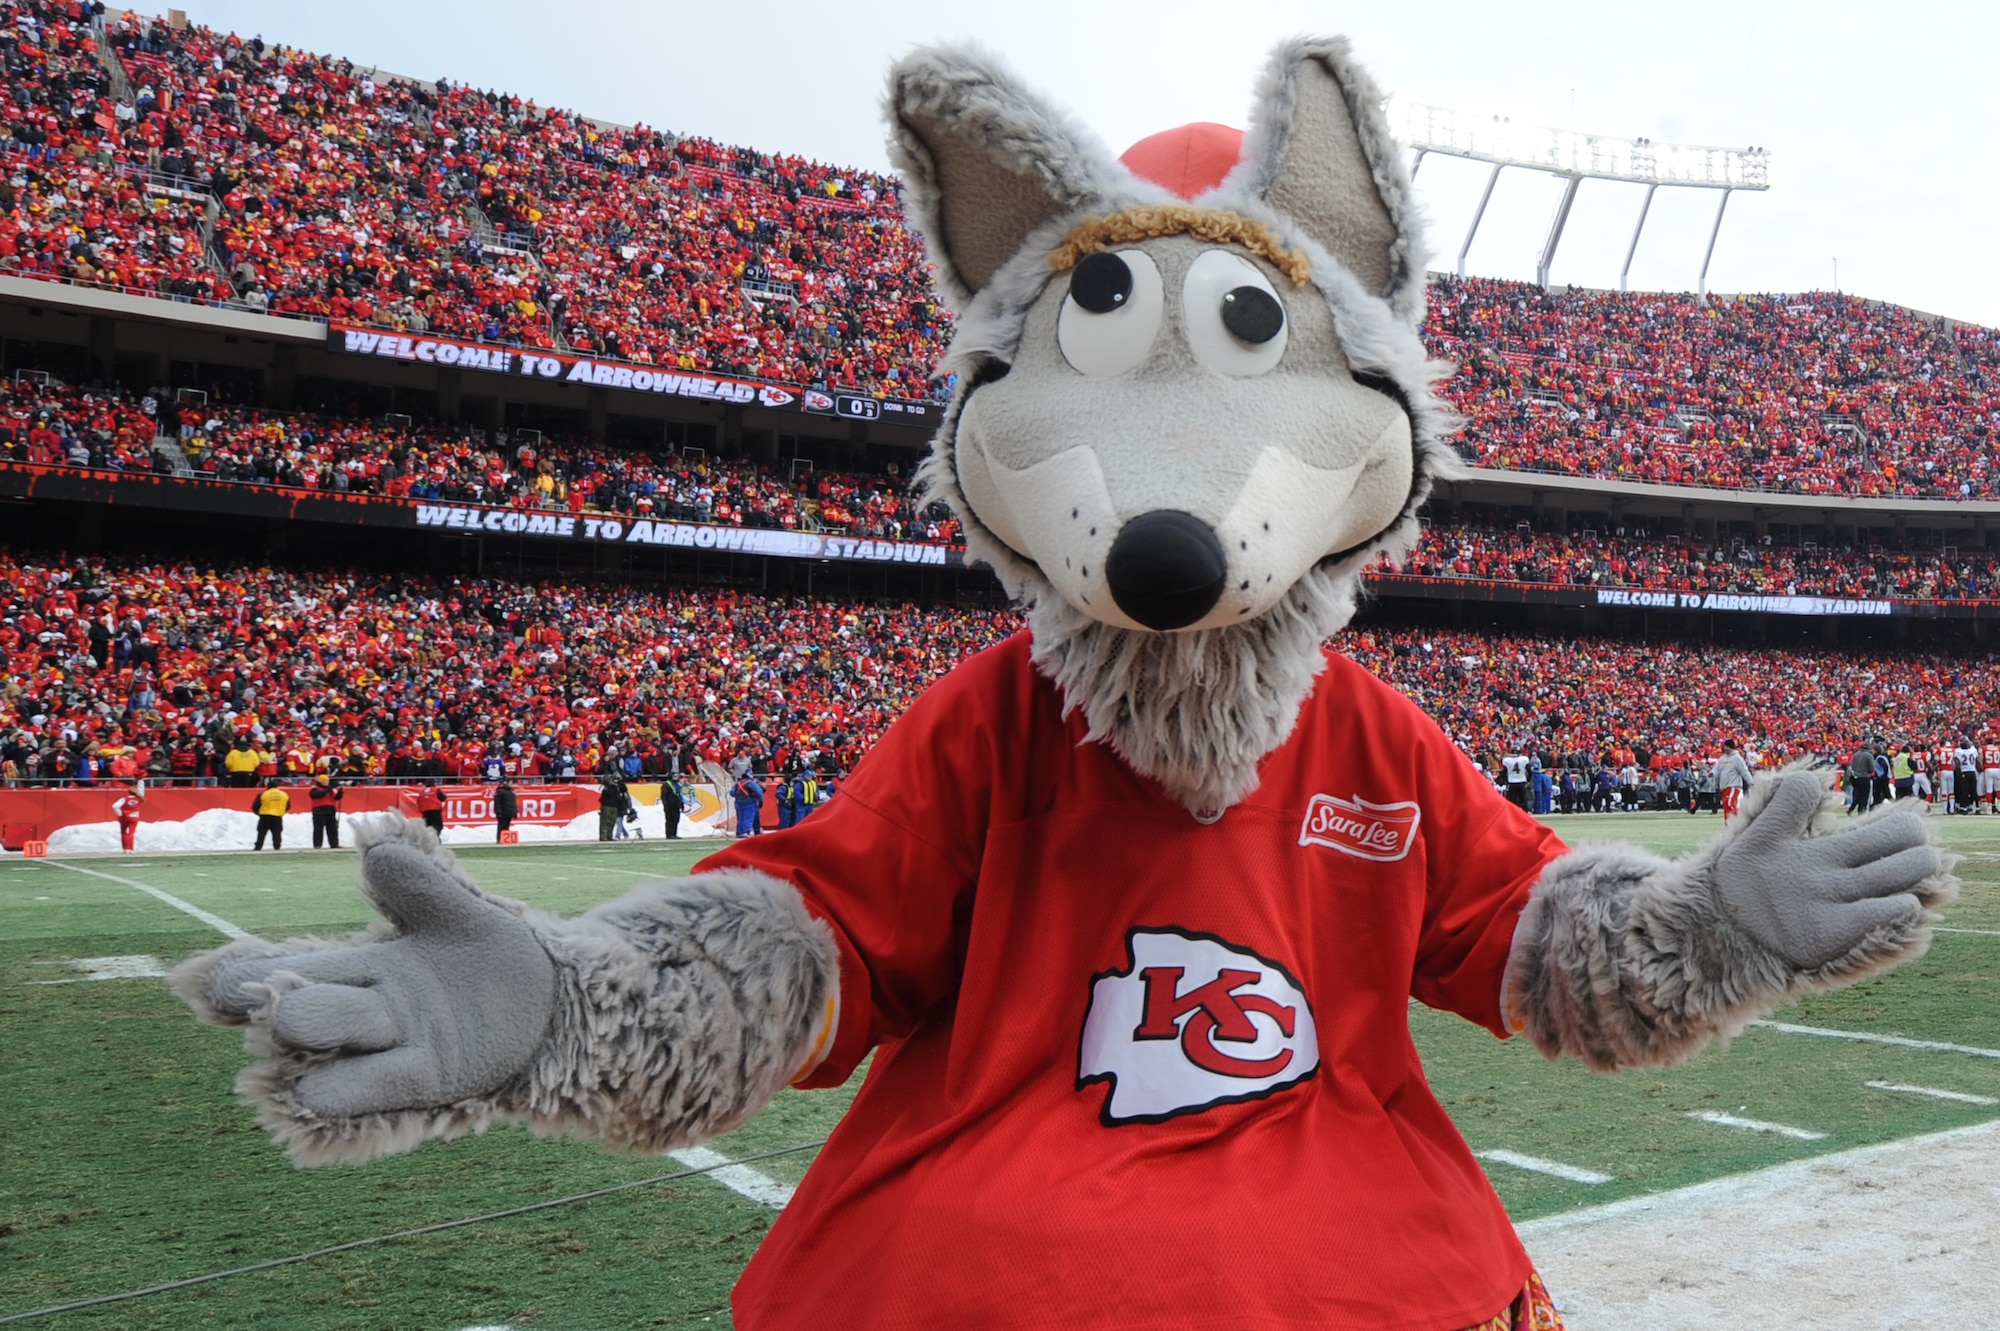 KANSAS CITY, Mo. - KC Wolf, the official mascot of the Kansas City Chiefs, ramps up fans before opening kick-off of the Chief's Wild Card game against the Baltimore Ravens Jan 9. (U.S. Air Force photo by Senior Airman Carlin Leslie)